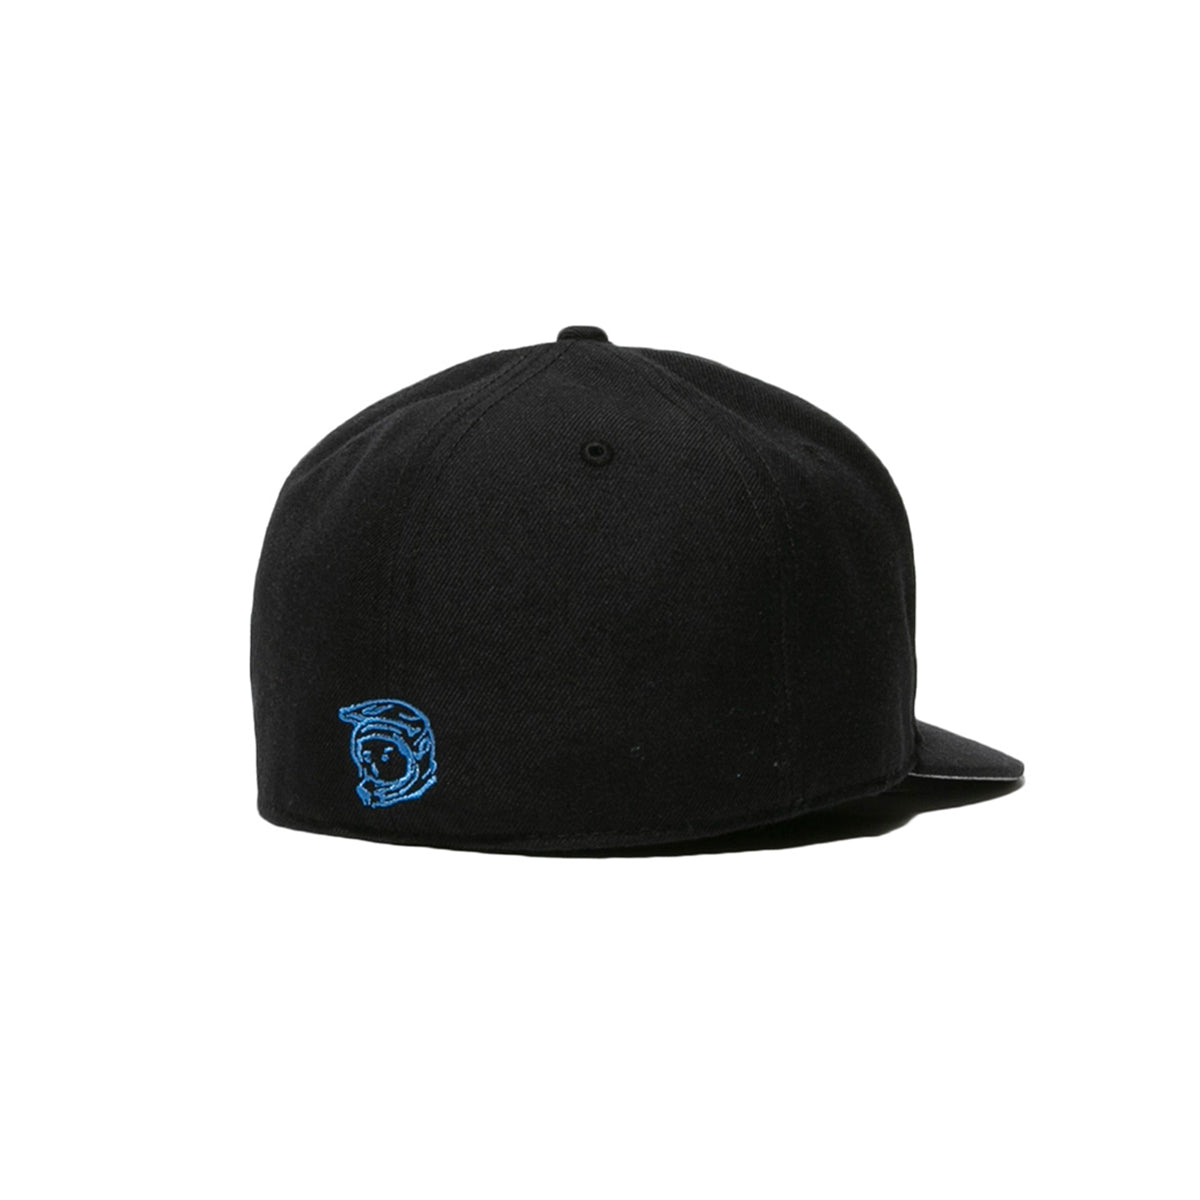 Flying B Fitted Cap-Black